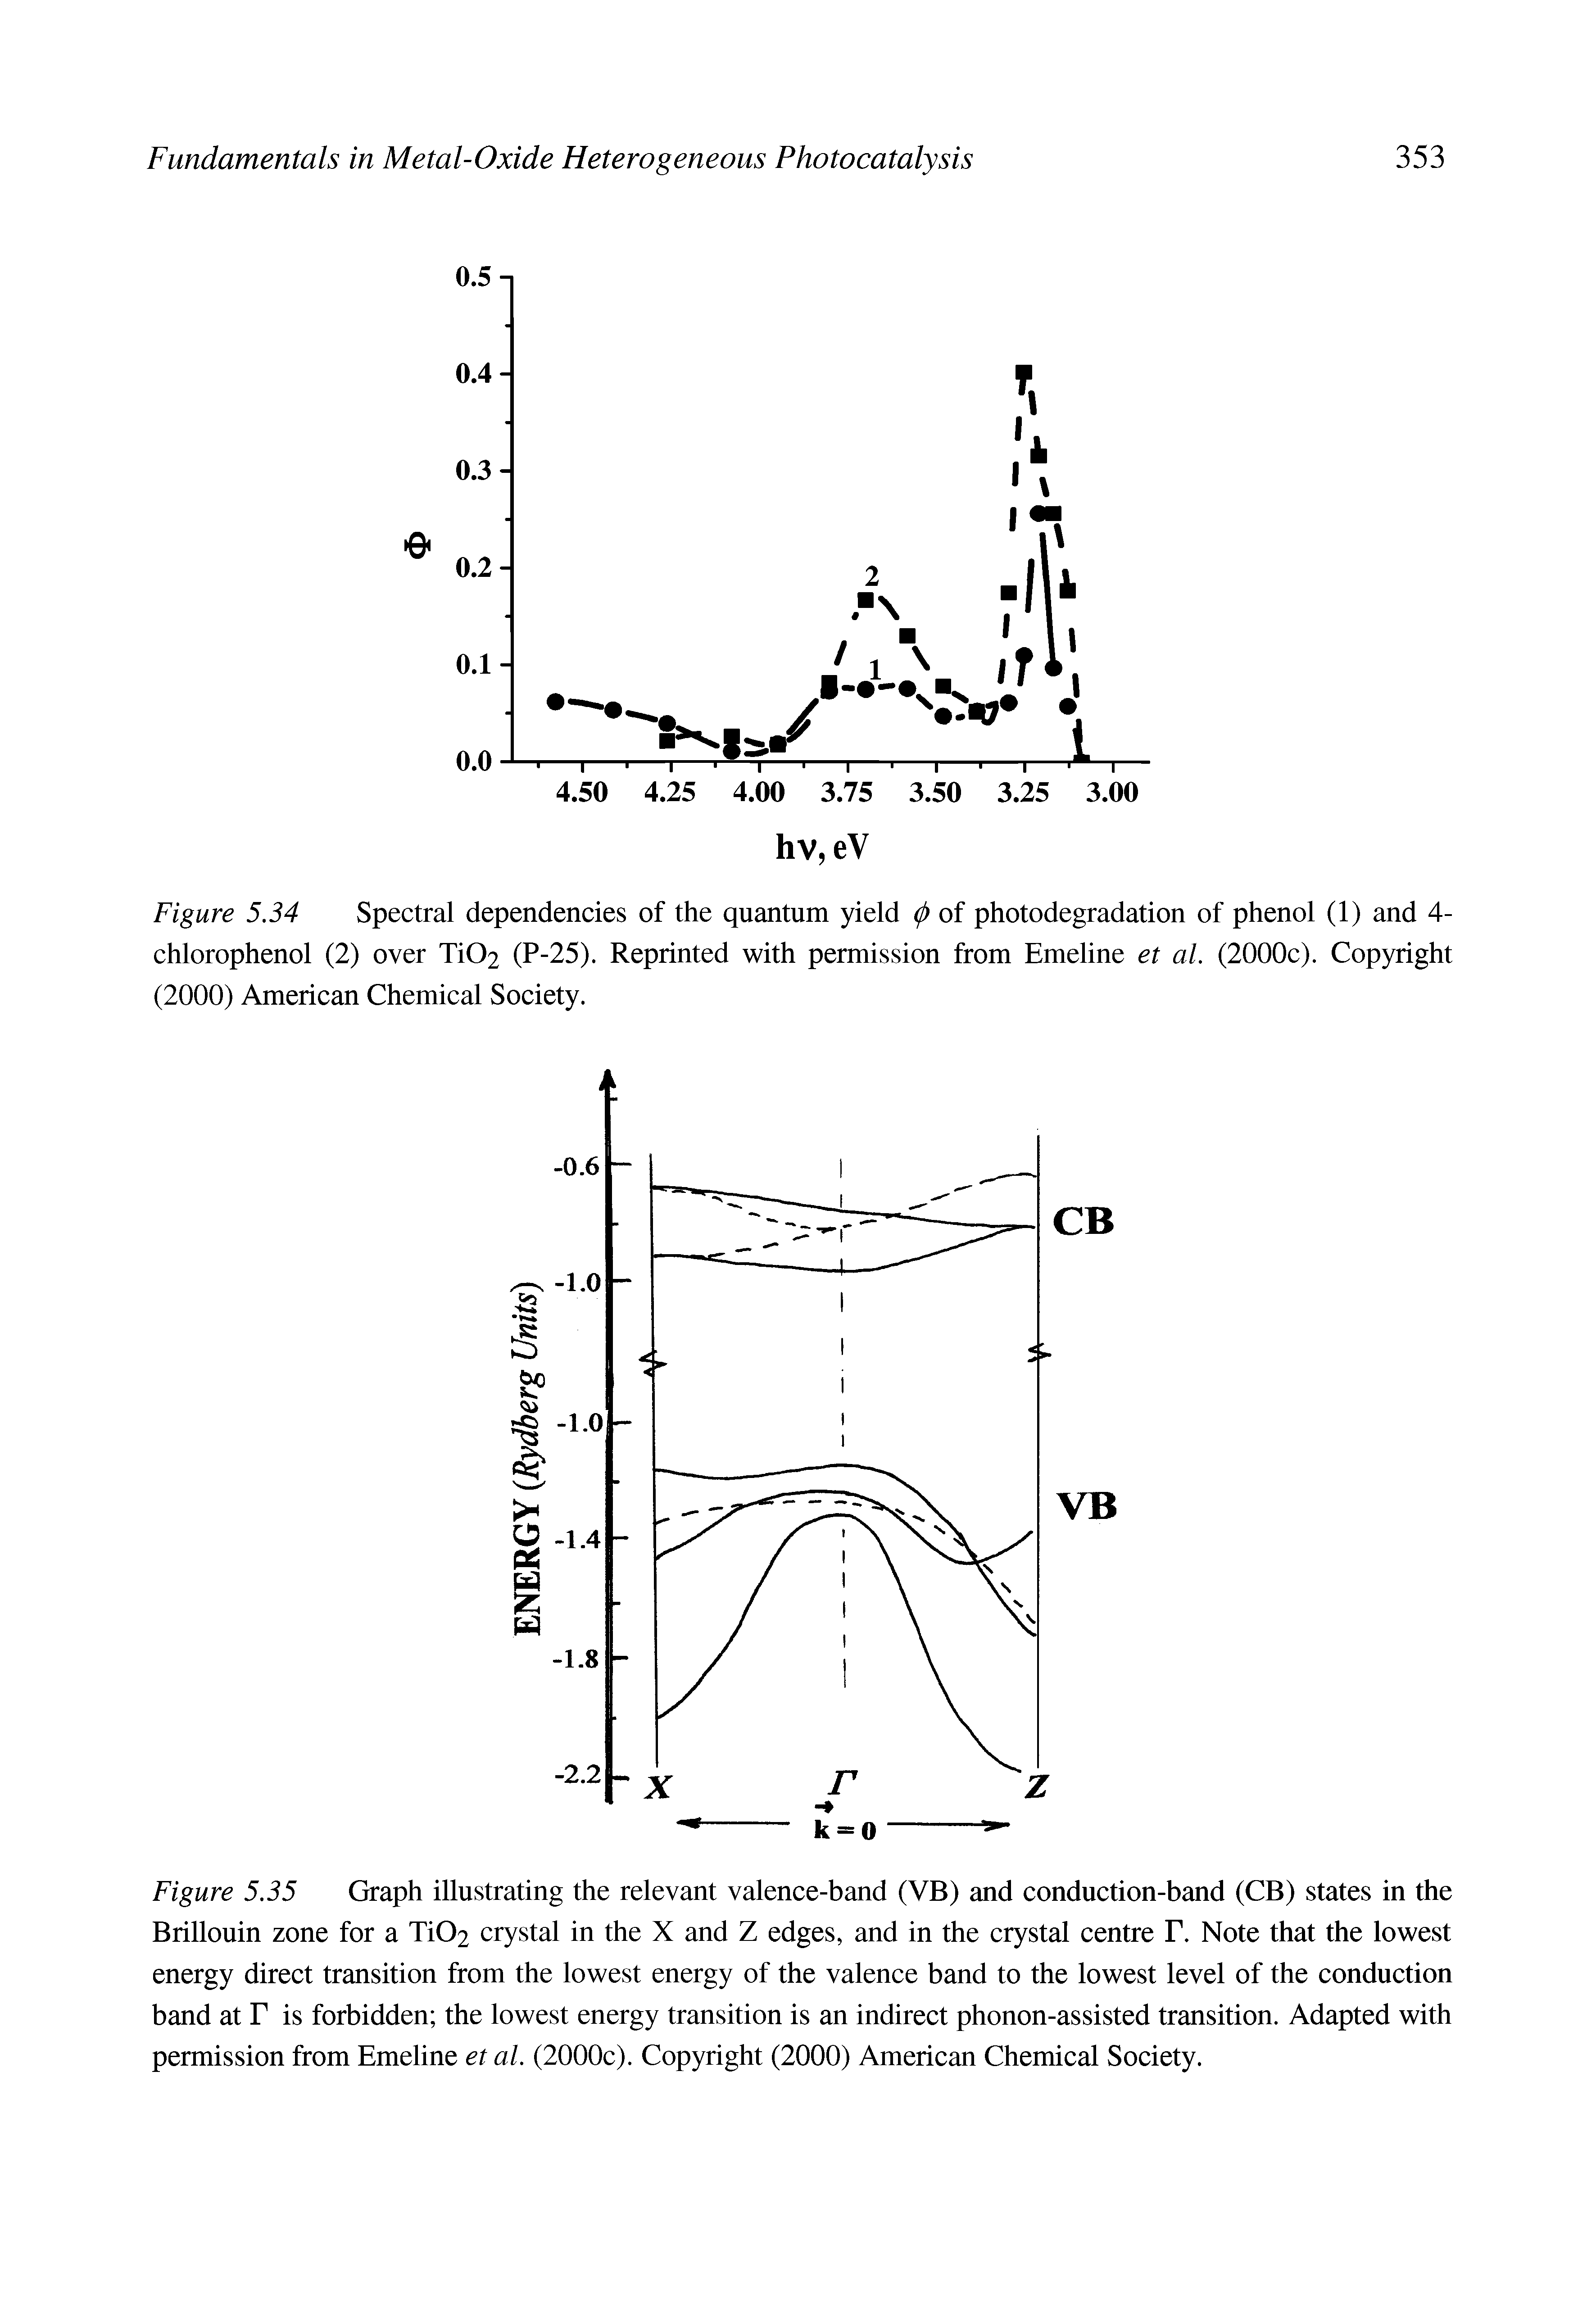 Figure 5.34 Spectral dependencies of the quantum yield (/> of photodegradation of phenol (1) and 4-chlorophenol (2) over Ti02 (P-25). Reprinted with permission from Emeline et al. (2000c). Copyright (2000) American Chemical Society.